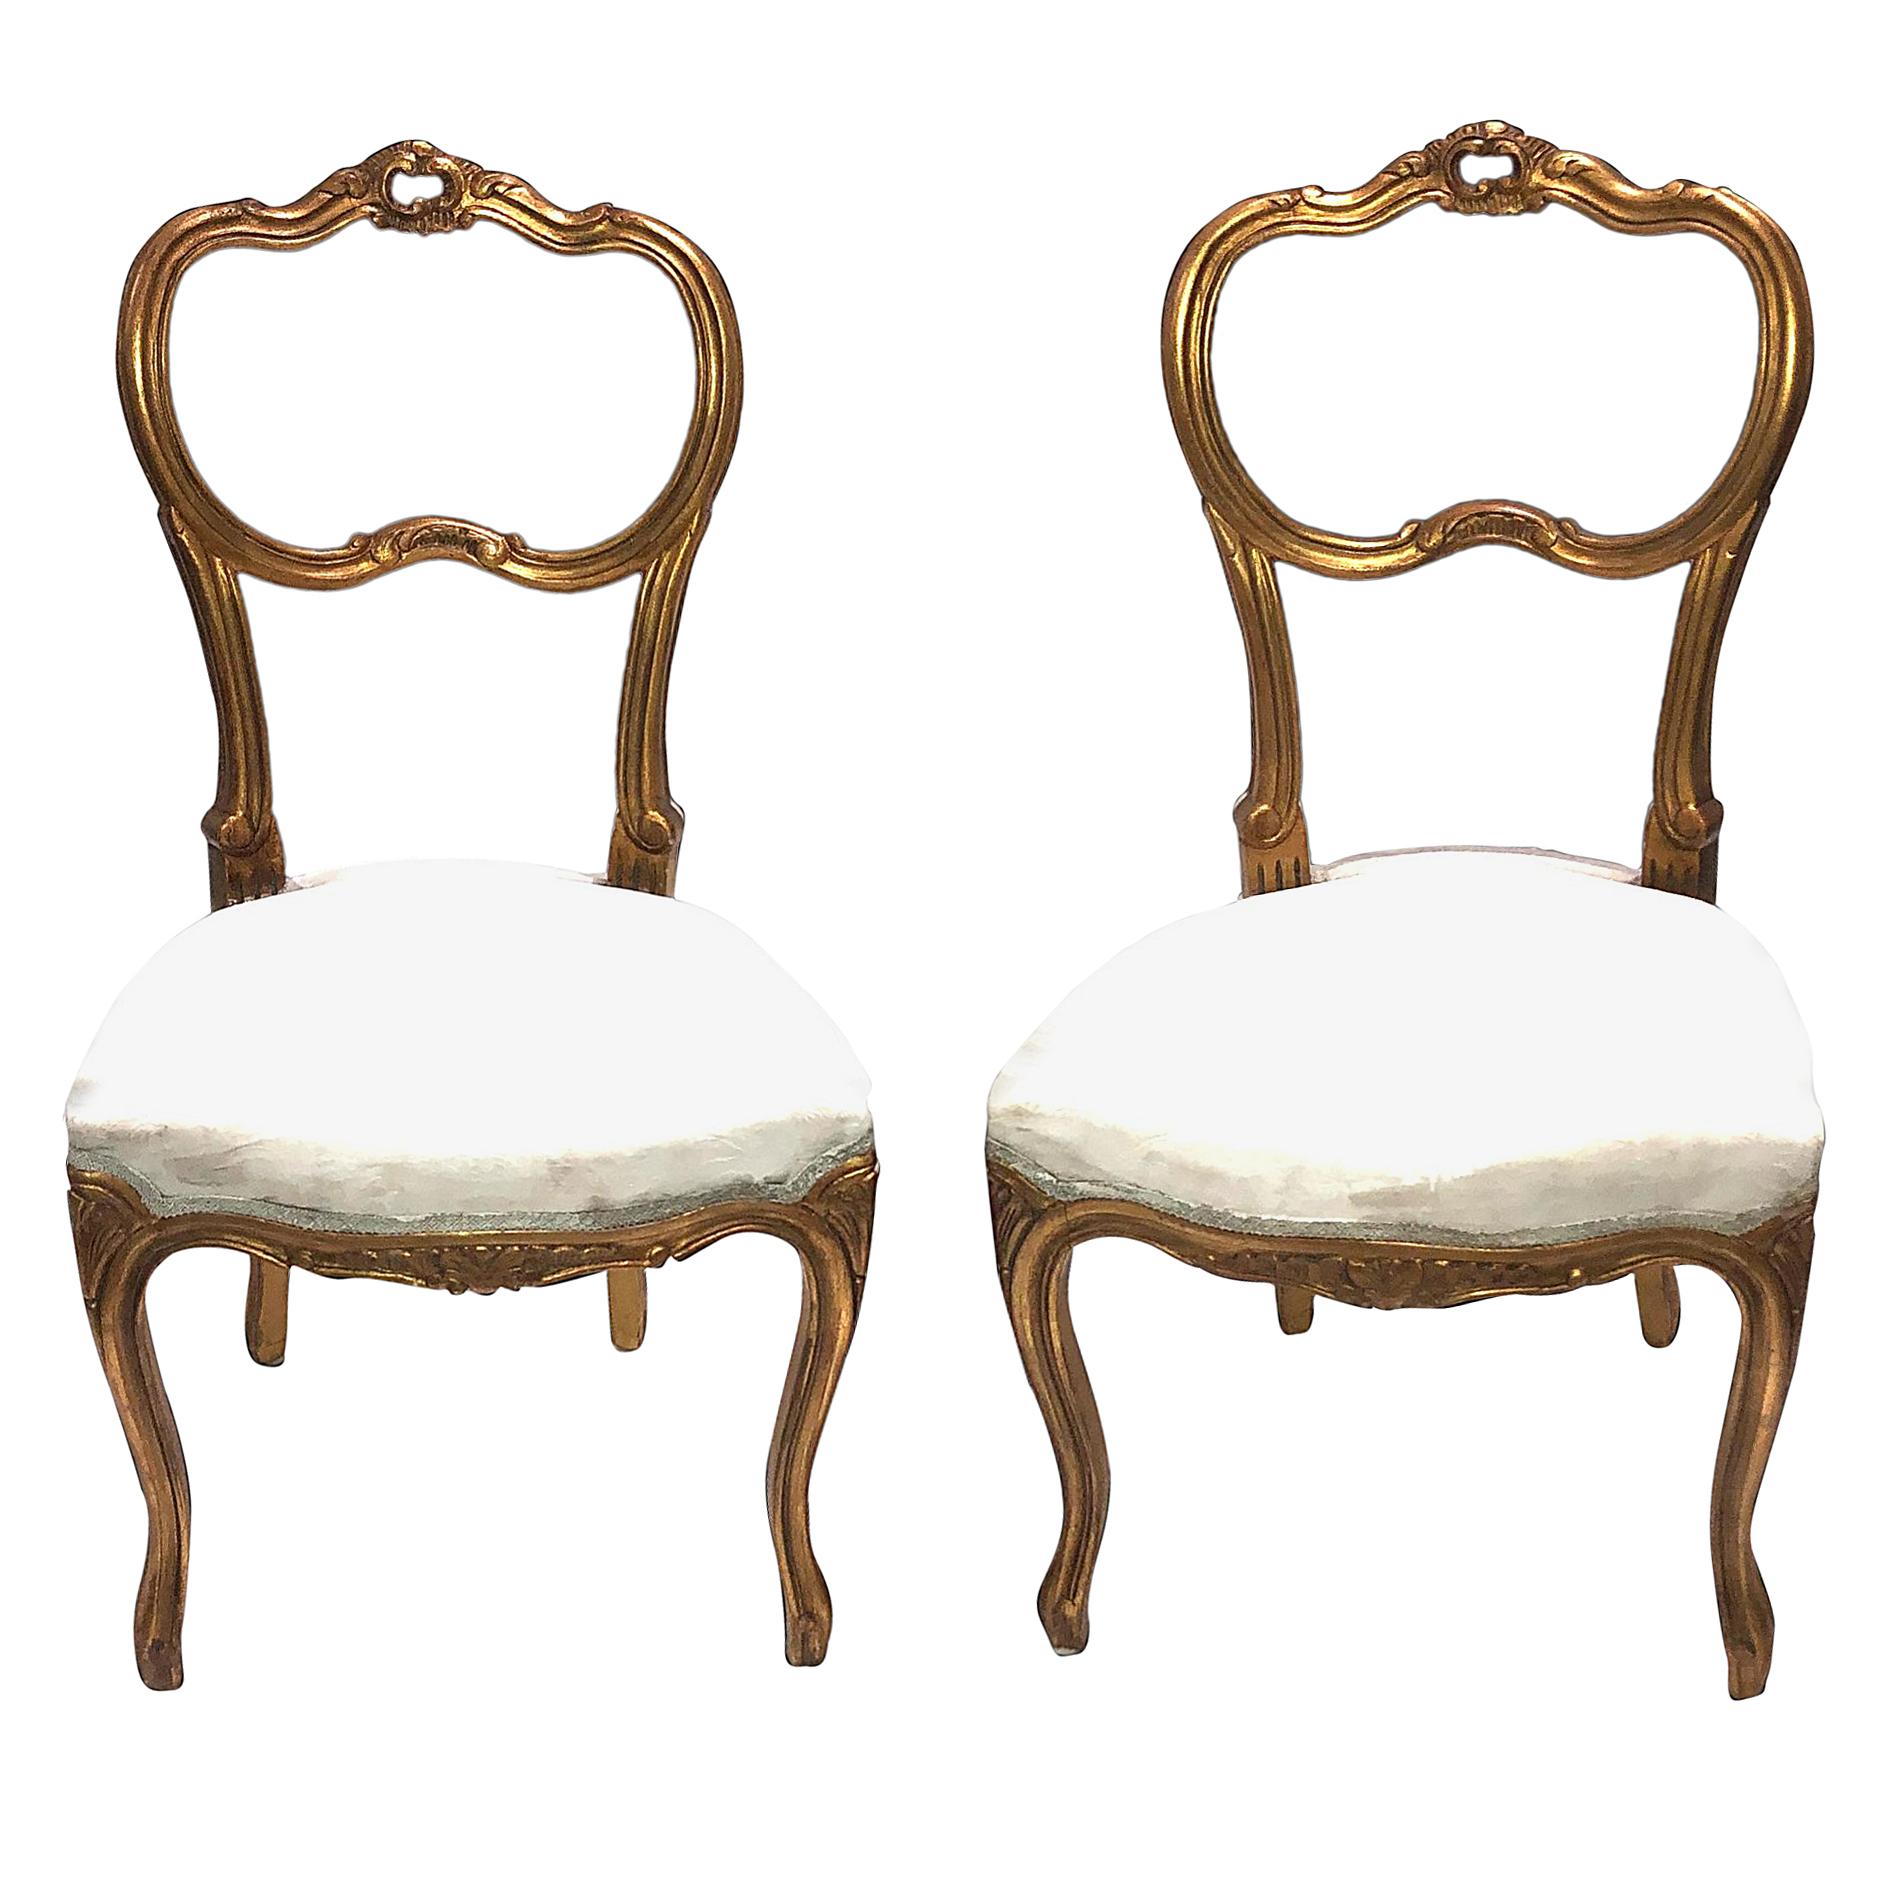 Pair of Giltwood Chairs, Shabby Chic Swedish Antique Farmhouse Style, 1920s For Sale